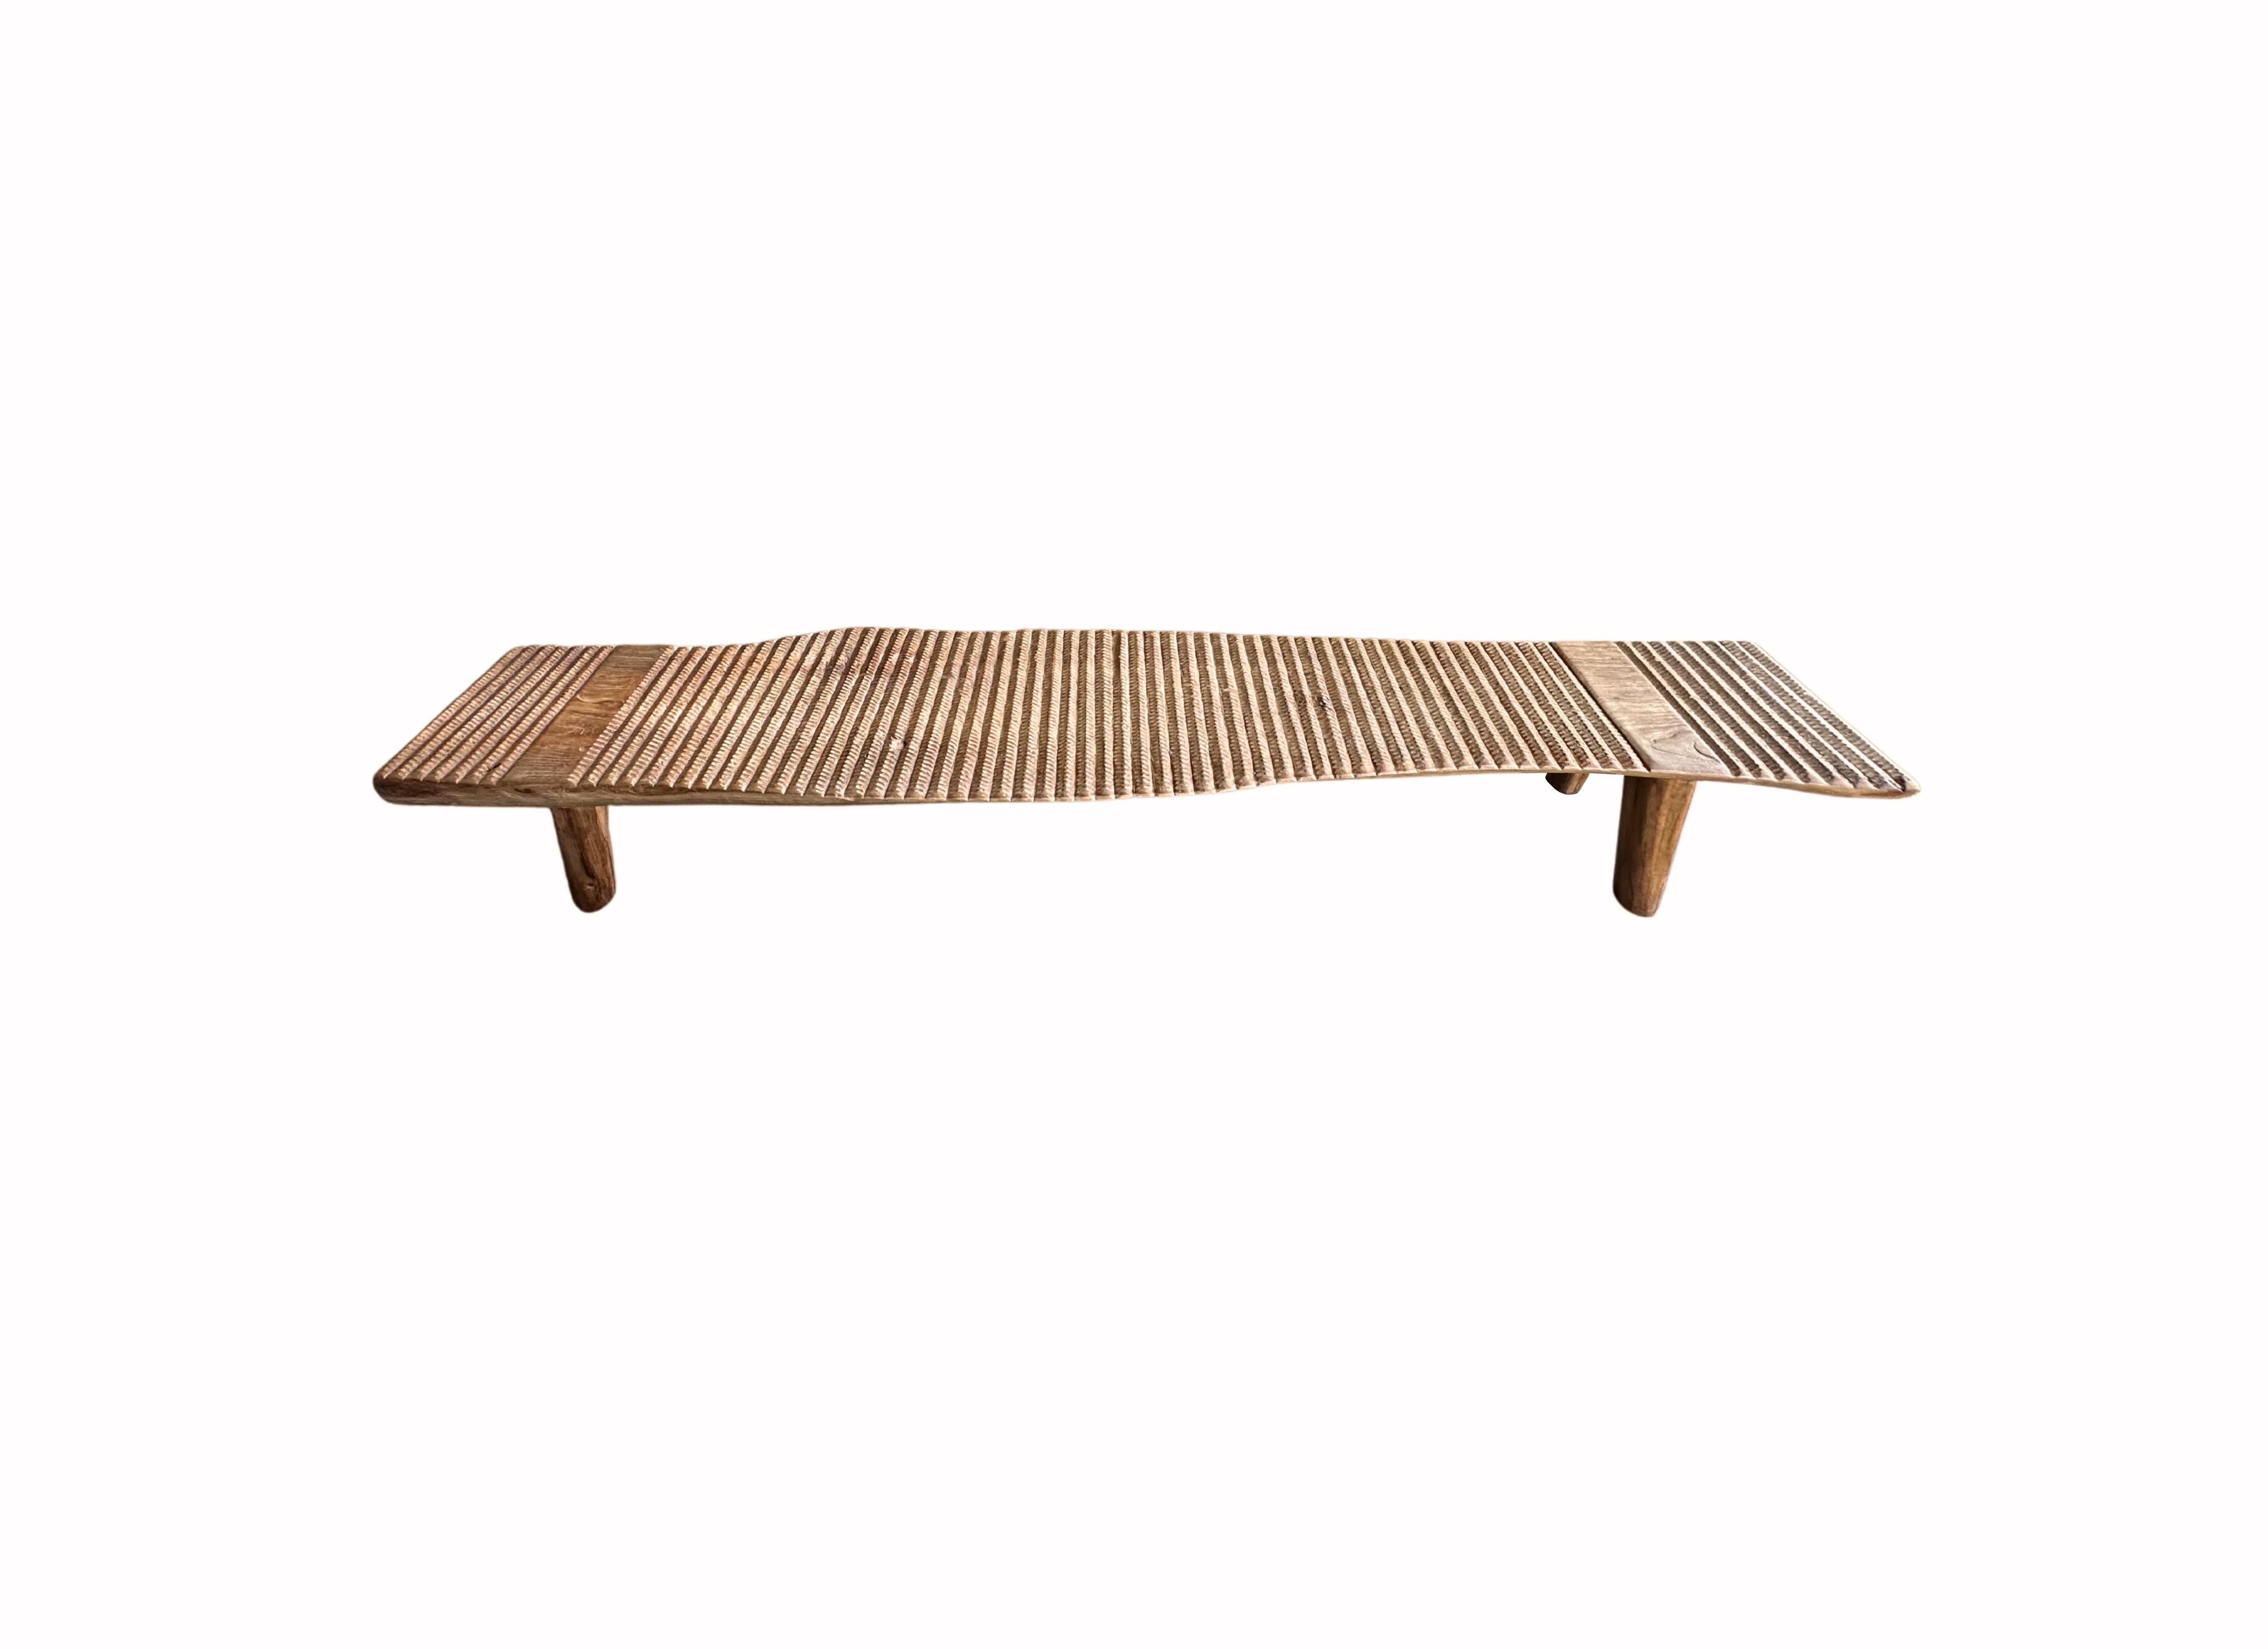 A wonderfully sculptural teak wood bench with carved detailing on its seat. This teak wood bench features a wonderful organic form with a mix of wood textures and shades. Elevated by four slender teak wood legs, the seat was carved from a single